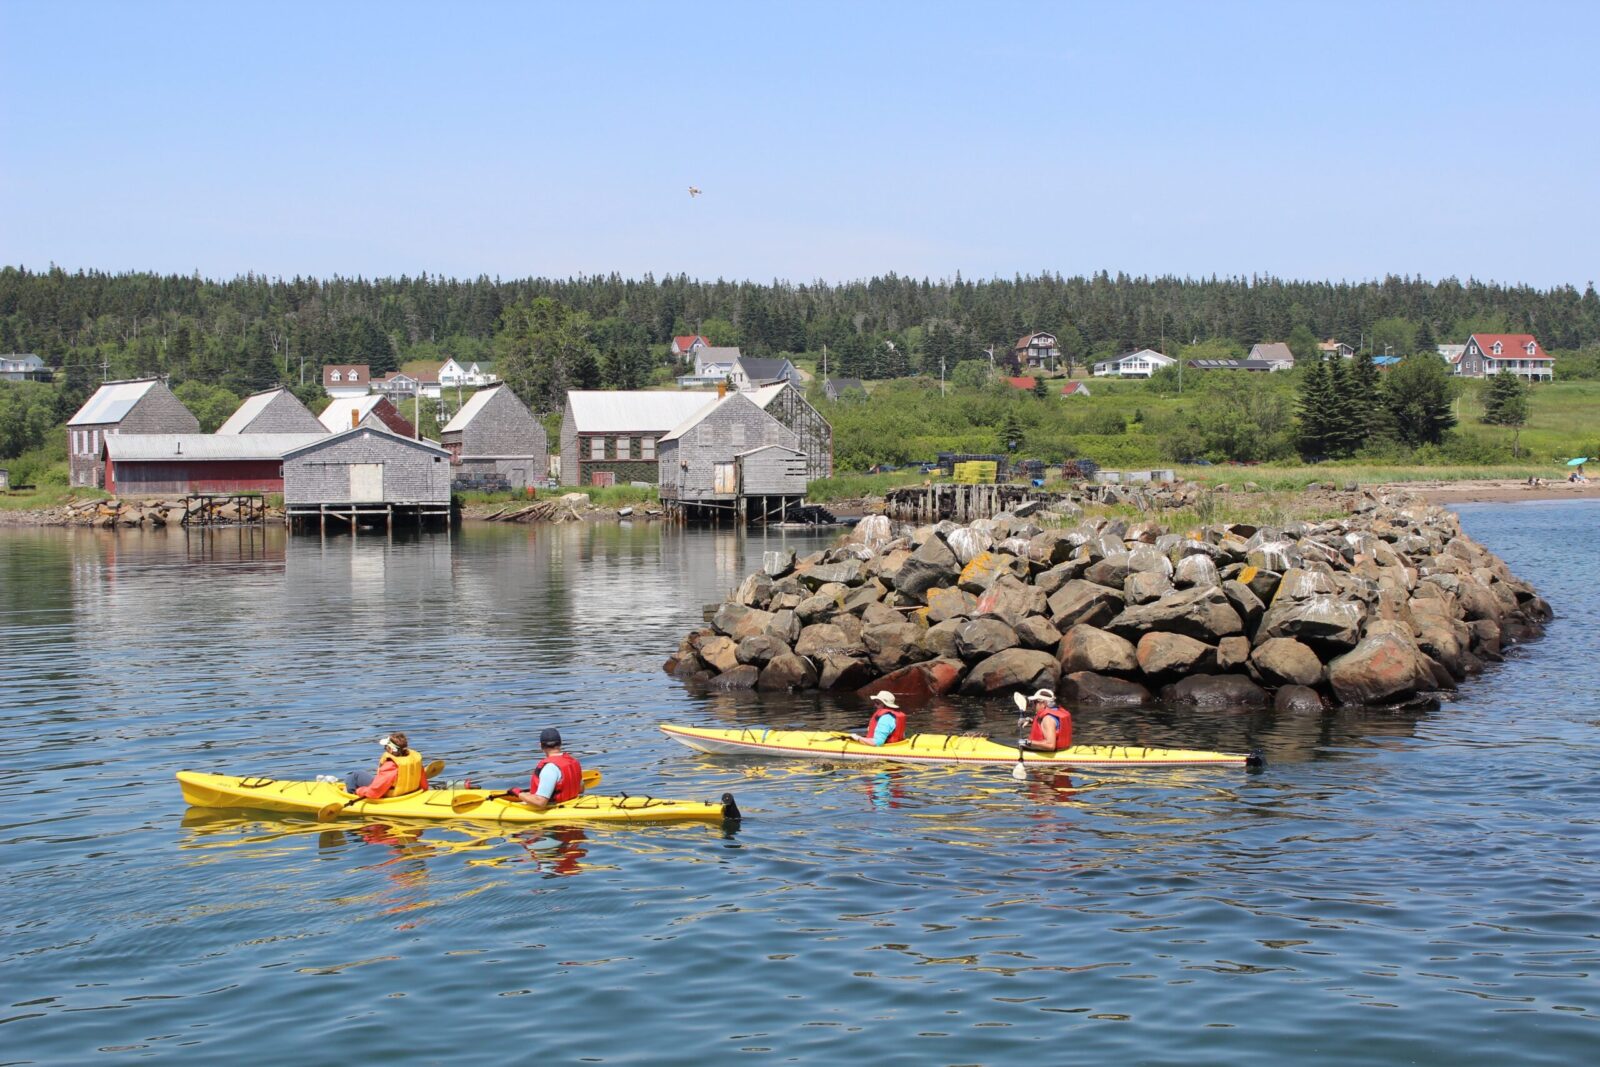 A group of people paddling kayaks in a body of water.